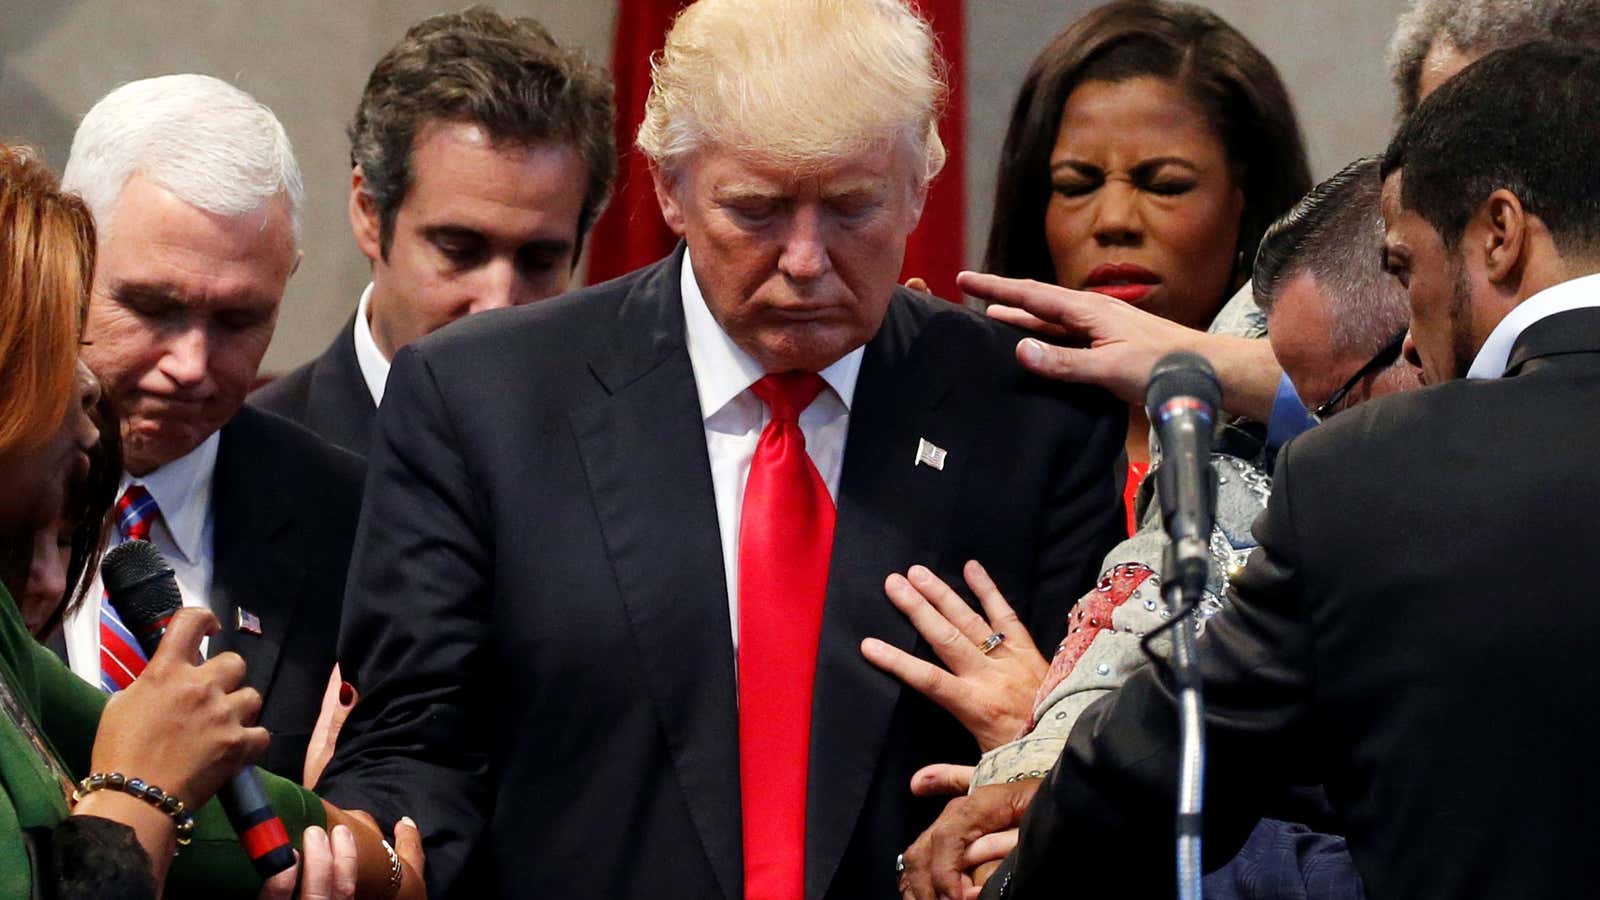 Praying over Trump in 2016.